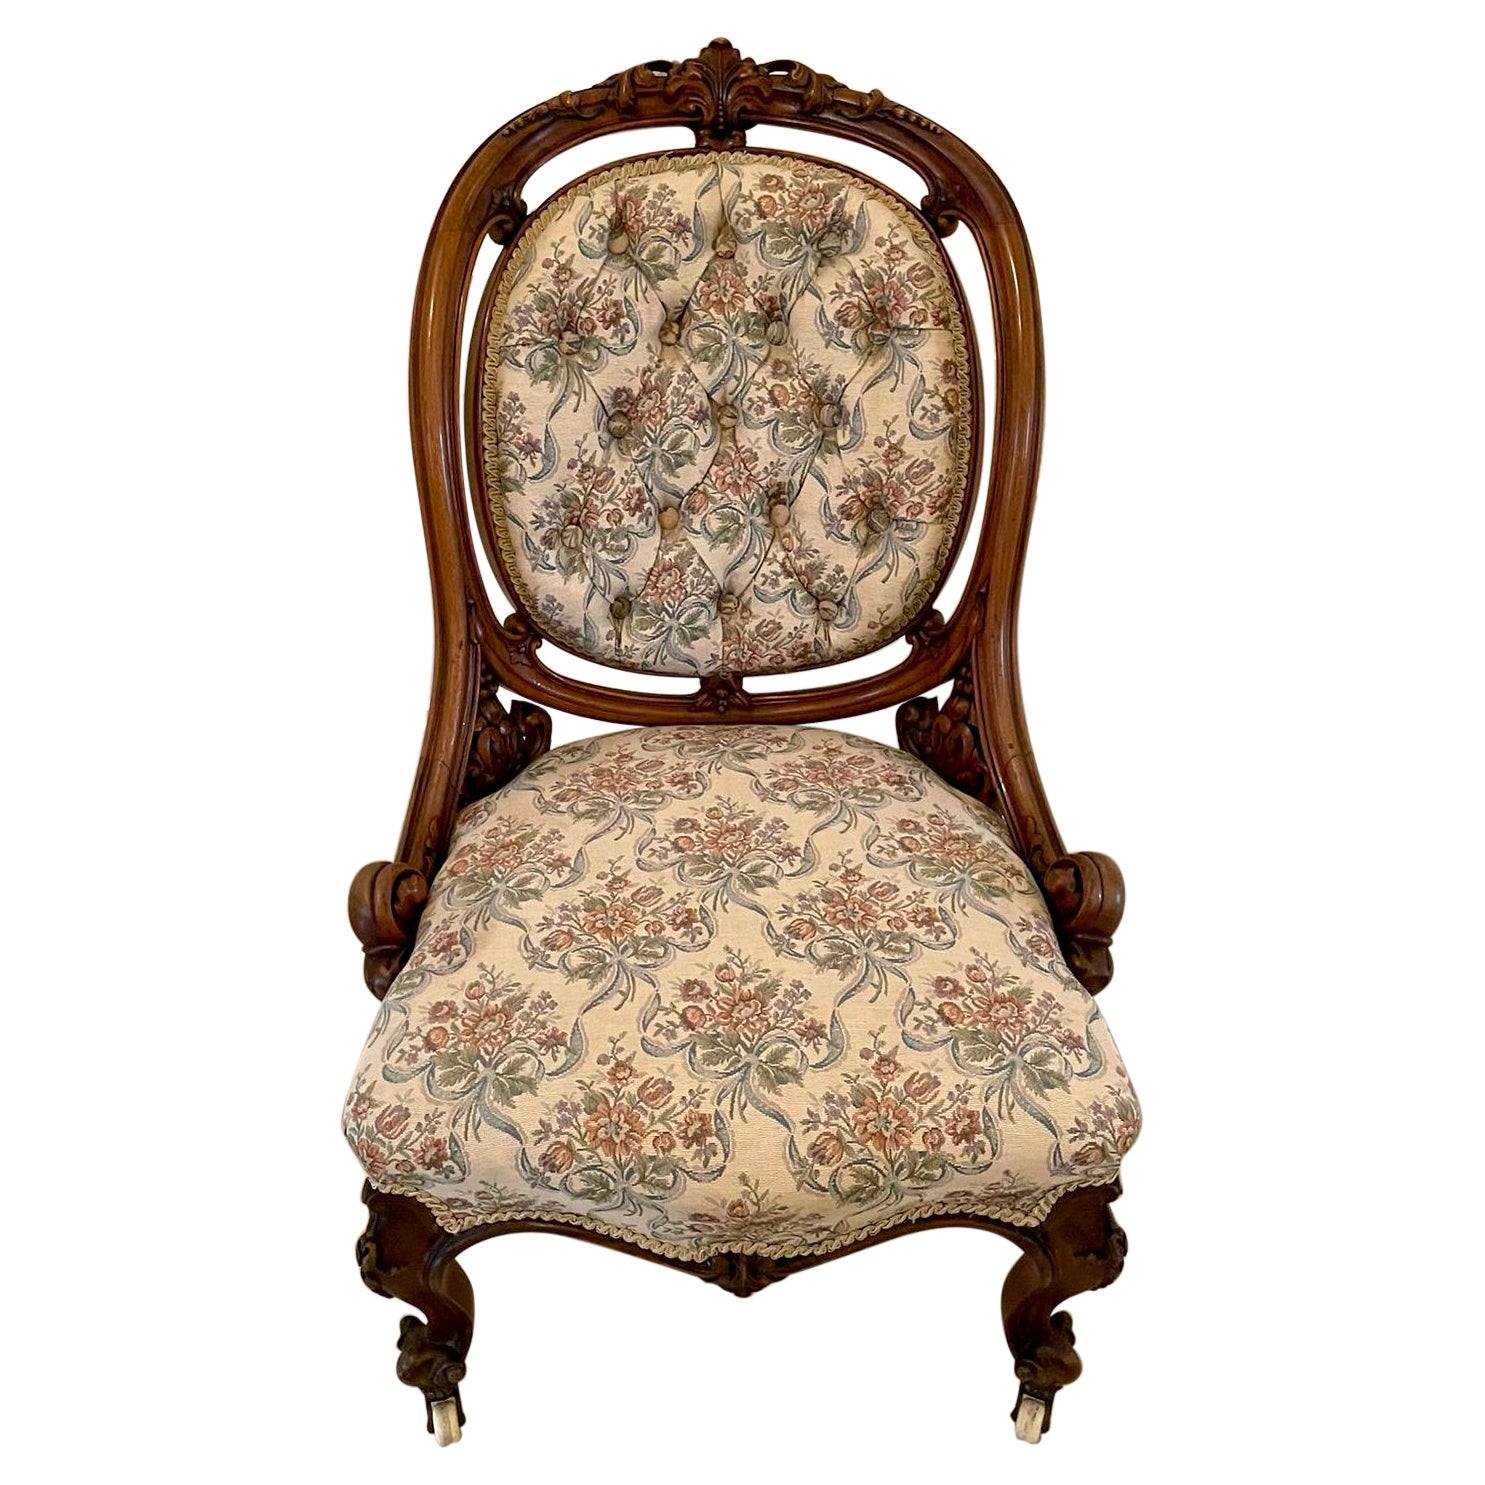 Outstanding Quality Antique Victorian Carved Walnut Chair For Sale